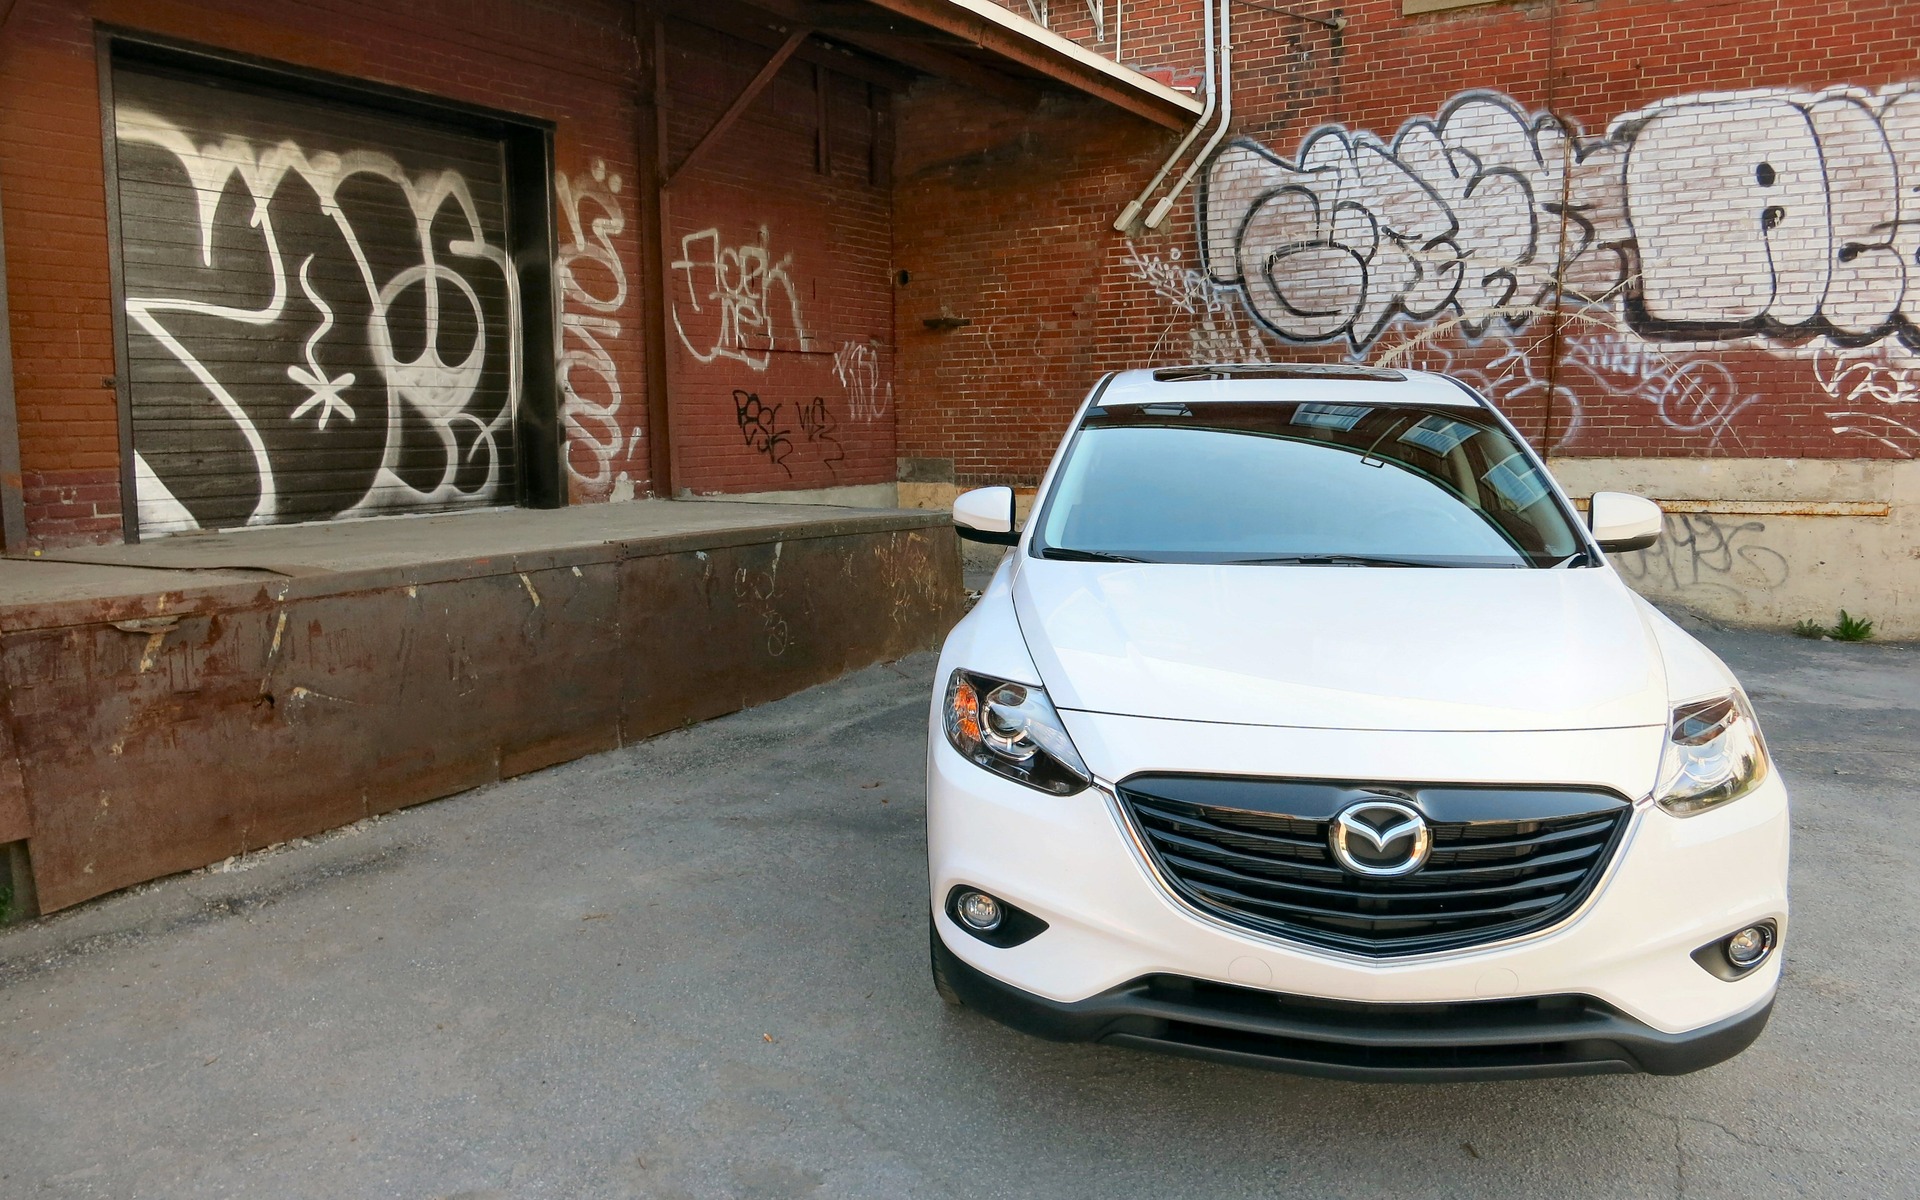 Where the CX-9 stands out is its curb weight.